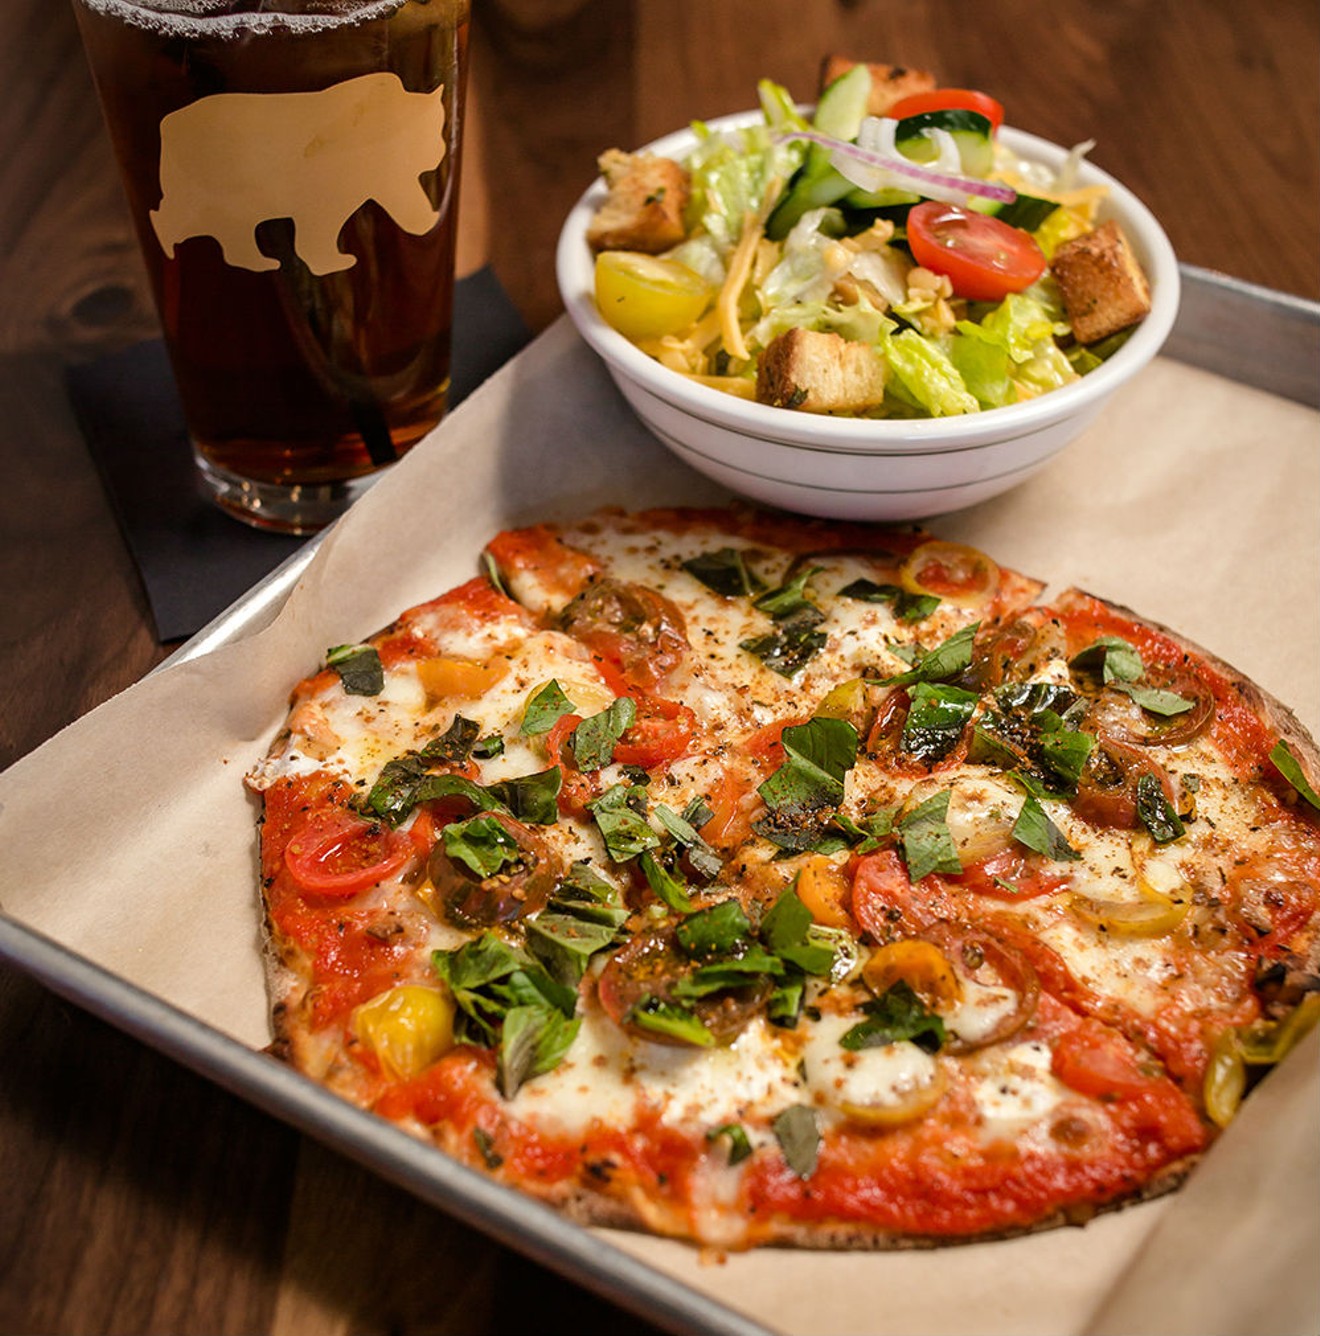 Union Bear Brewing brings craft beer and American fare to Plano.